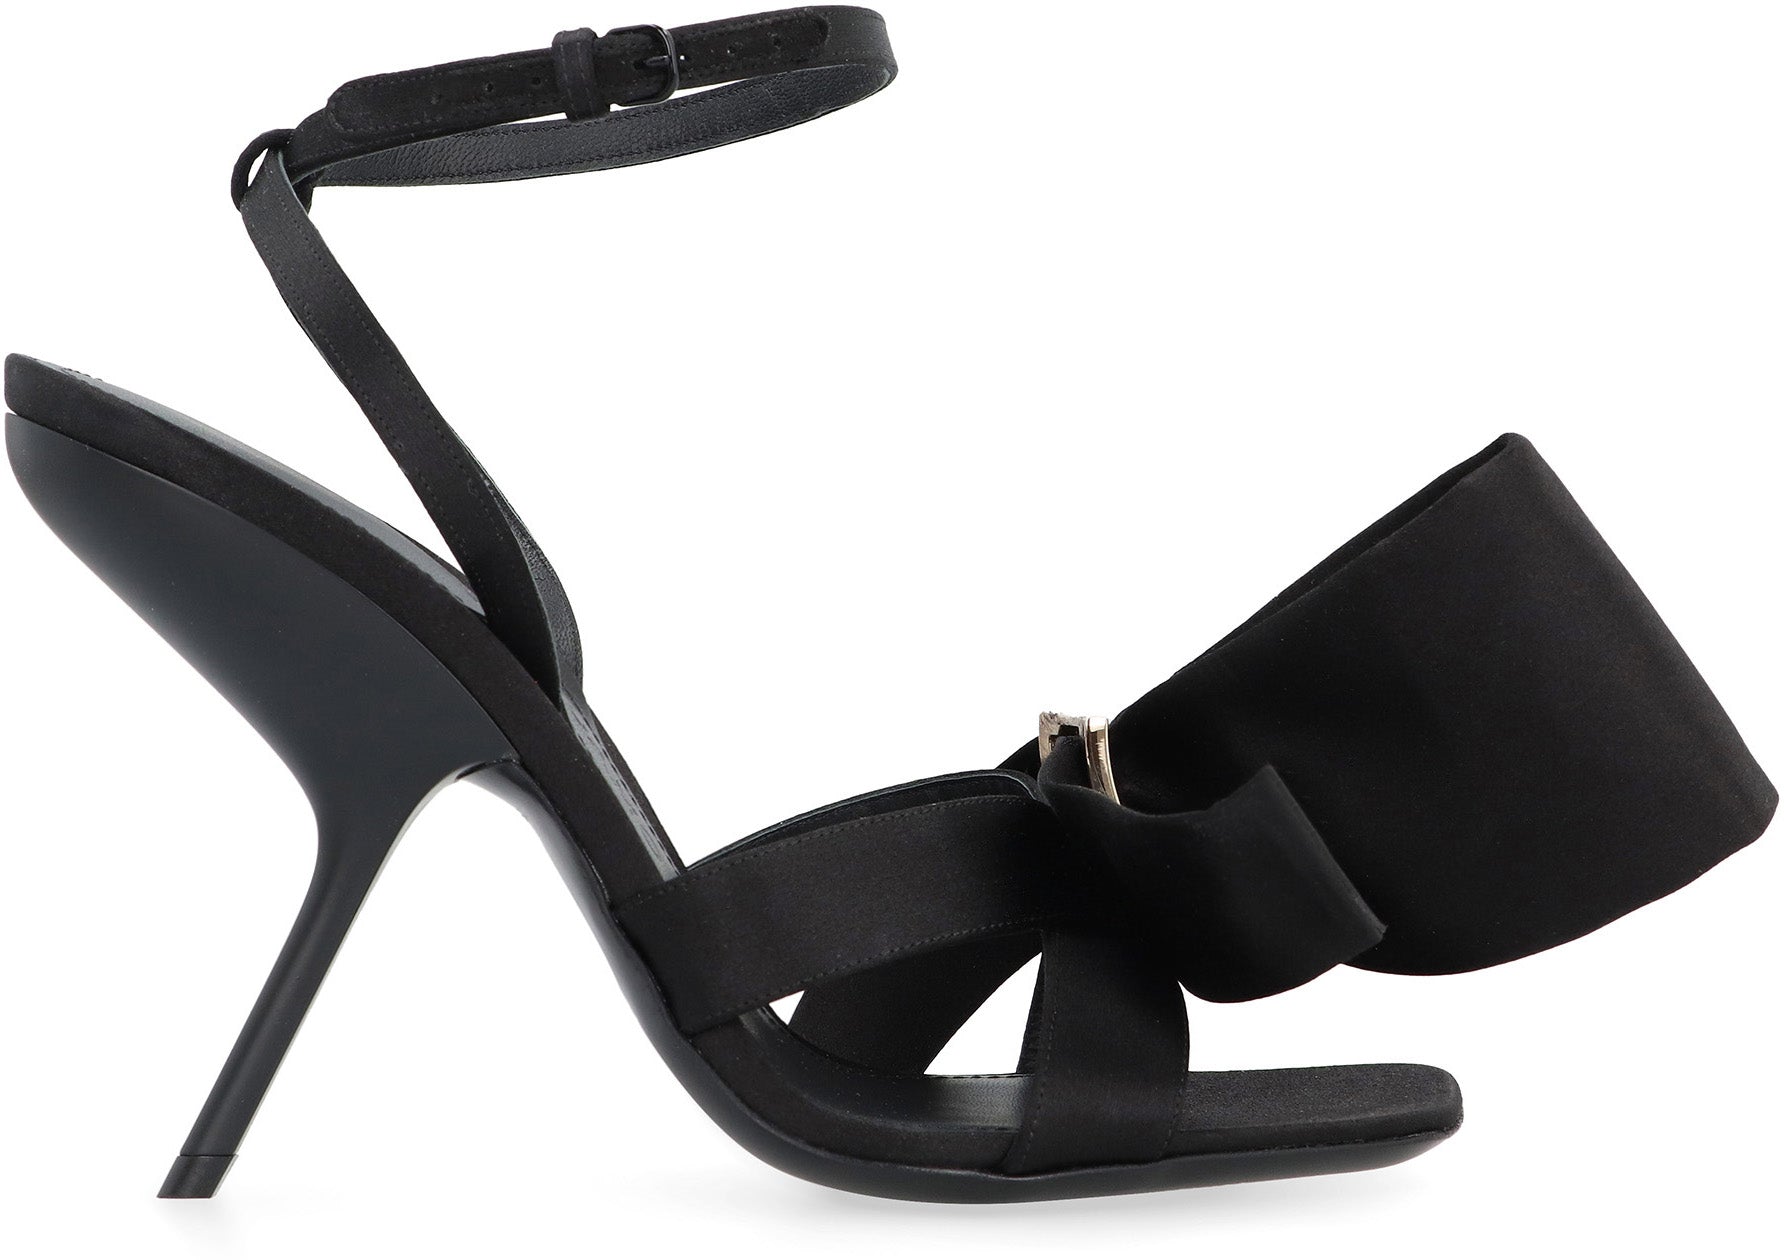 Shop Ferragamo Black Satin Sandals With Front Bow And Adjustable Ankle Strap